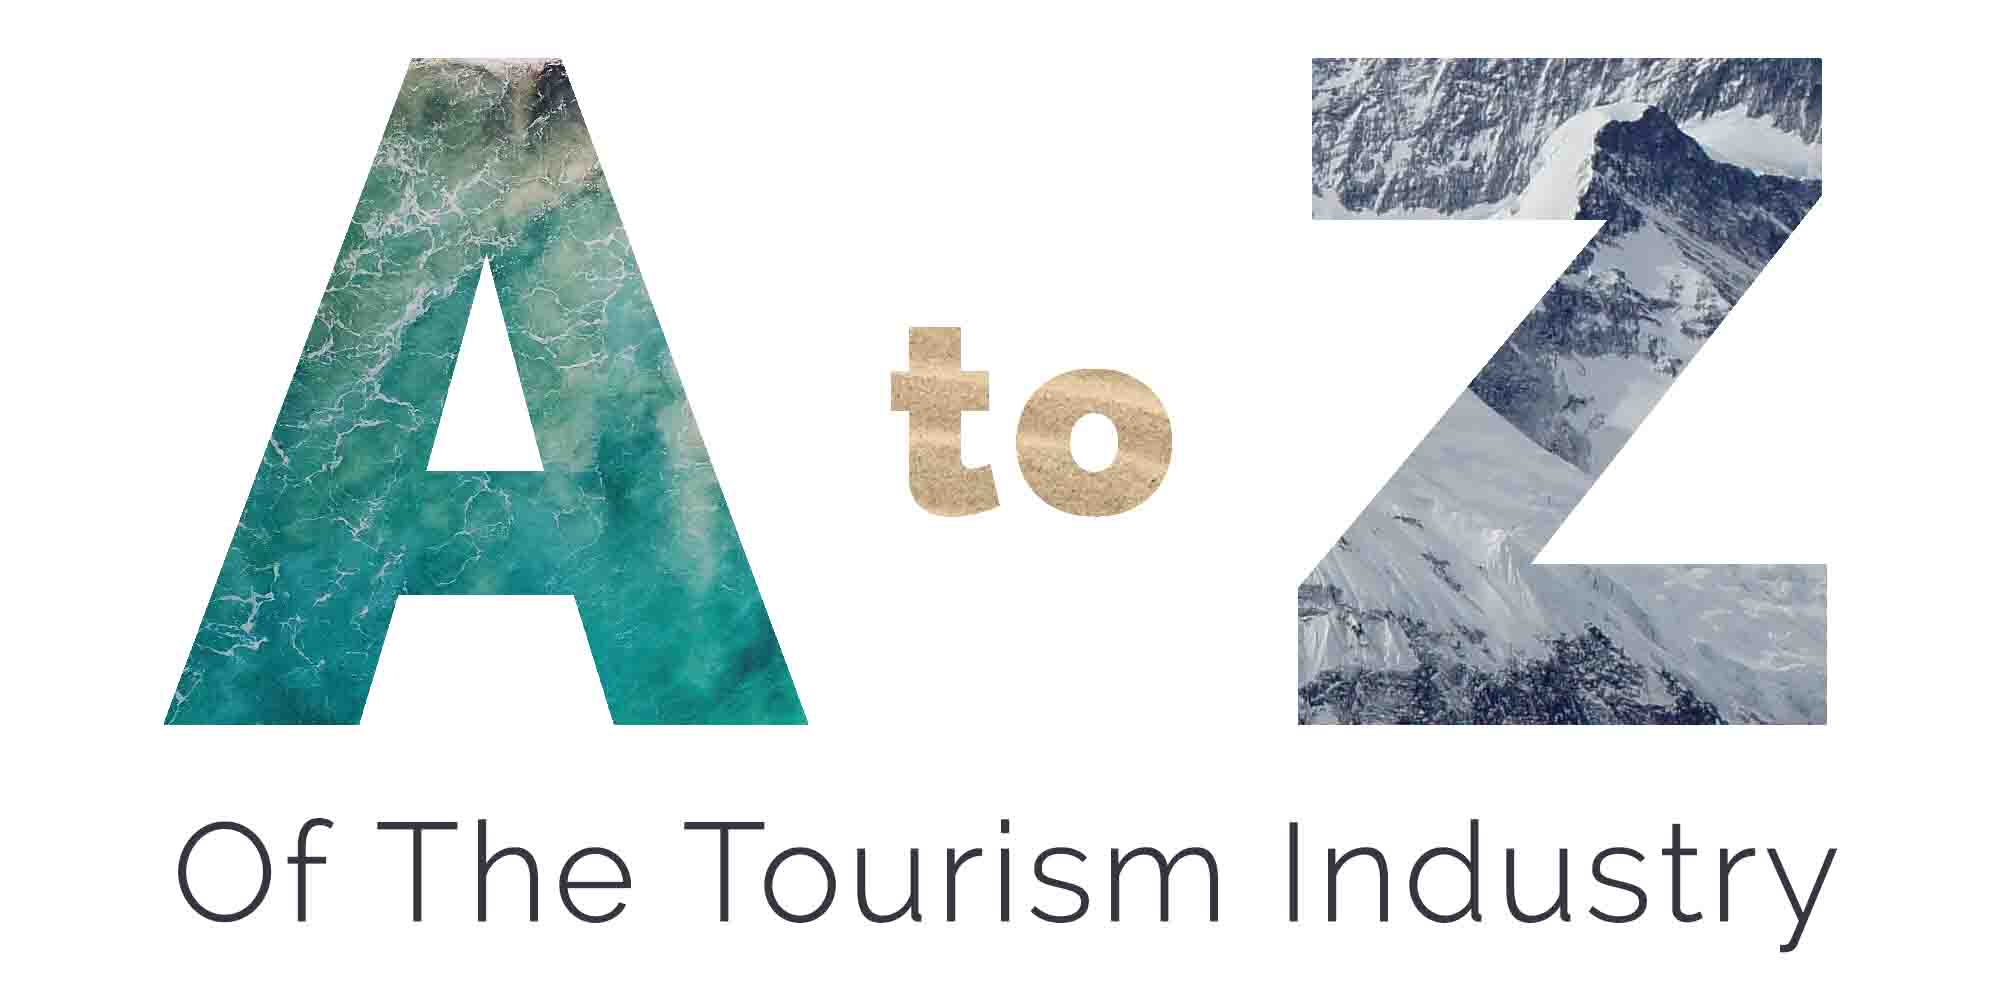 The A to Z of the tourism industry